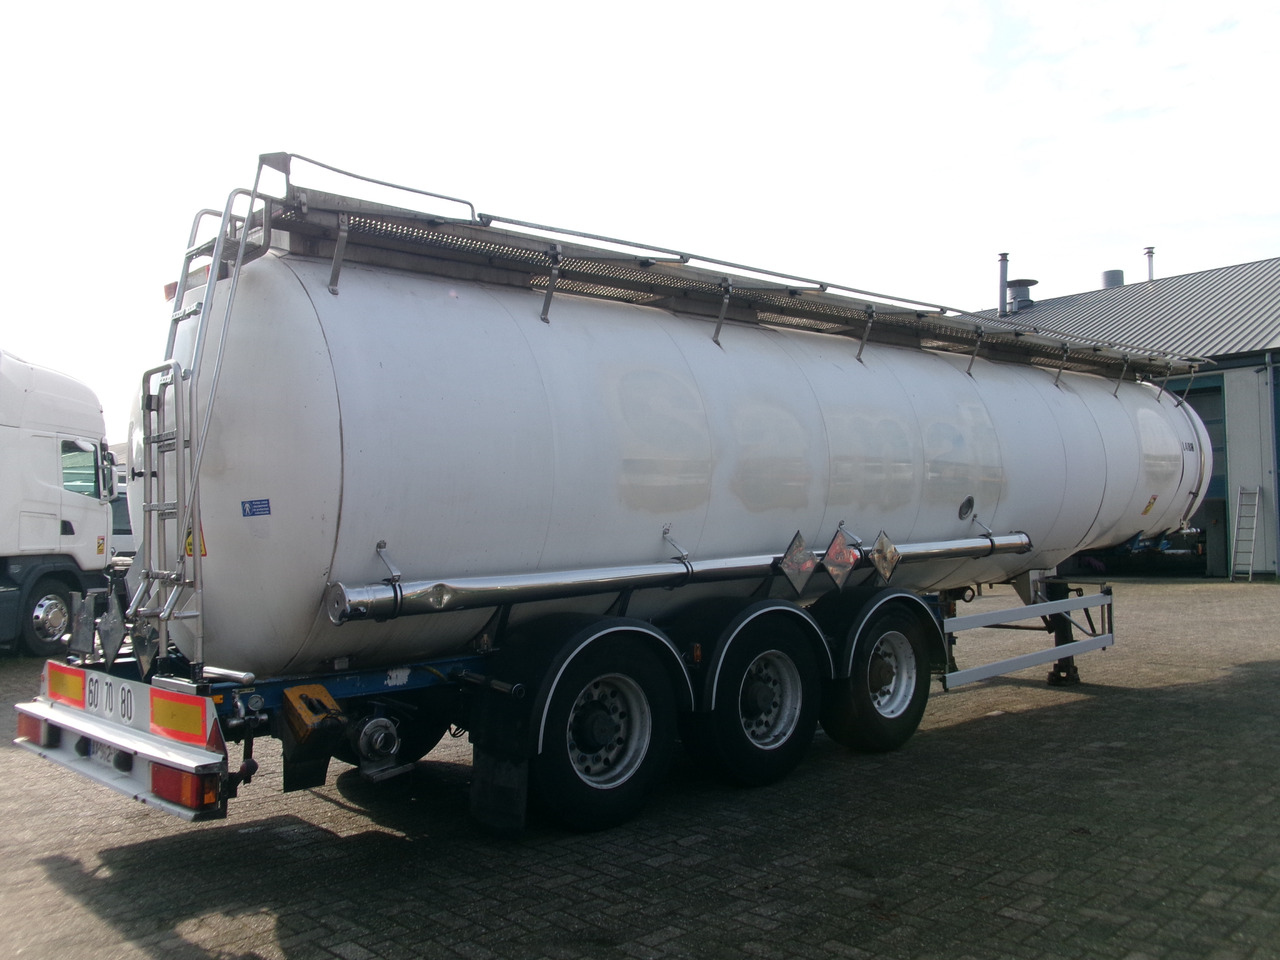 Tanker semi-trailer for transportation of chemicals Magyar Chemical tank inox L4BH 34 m3 / 1 comp: picture 3